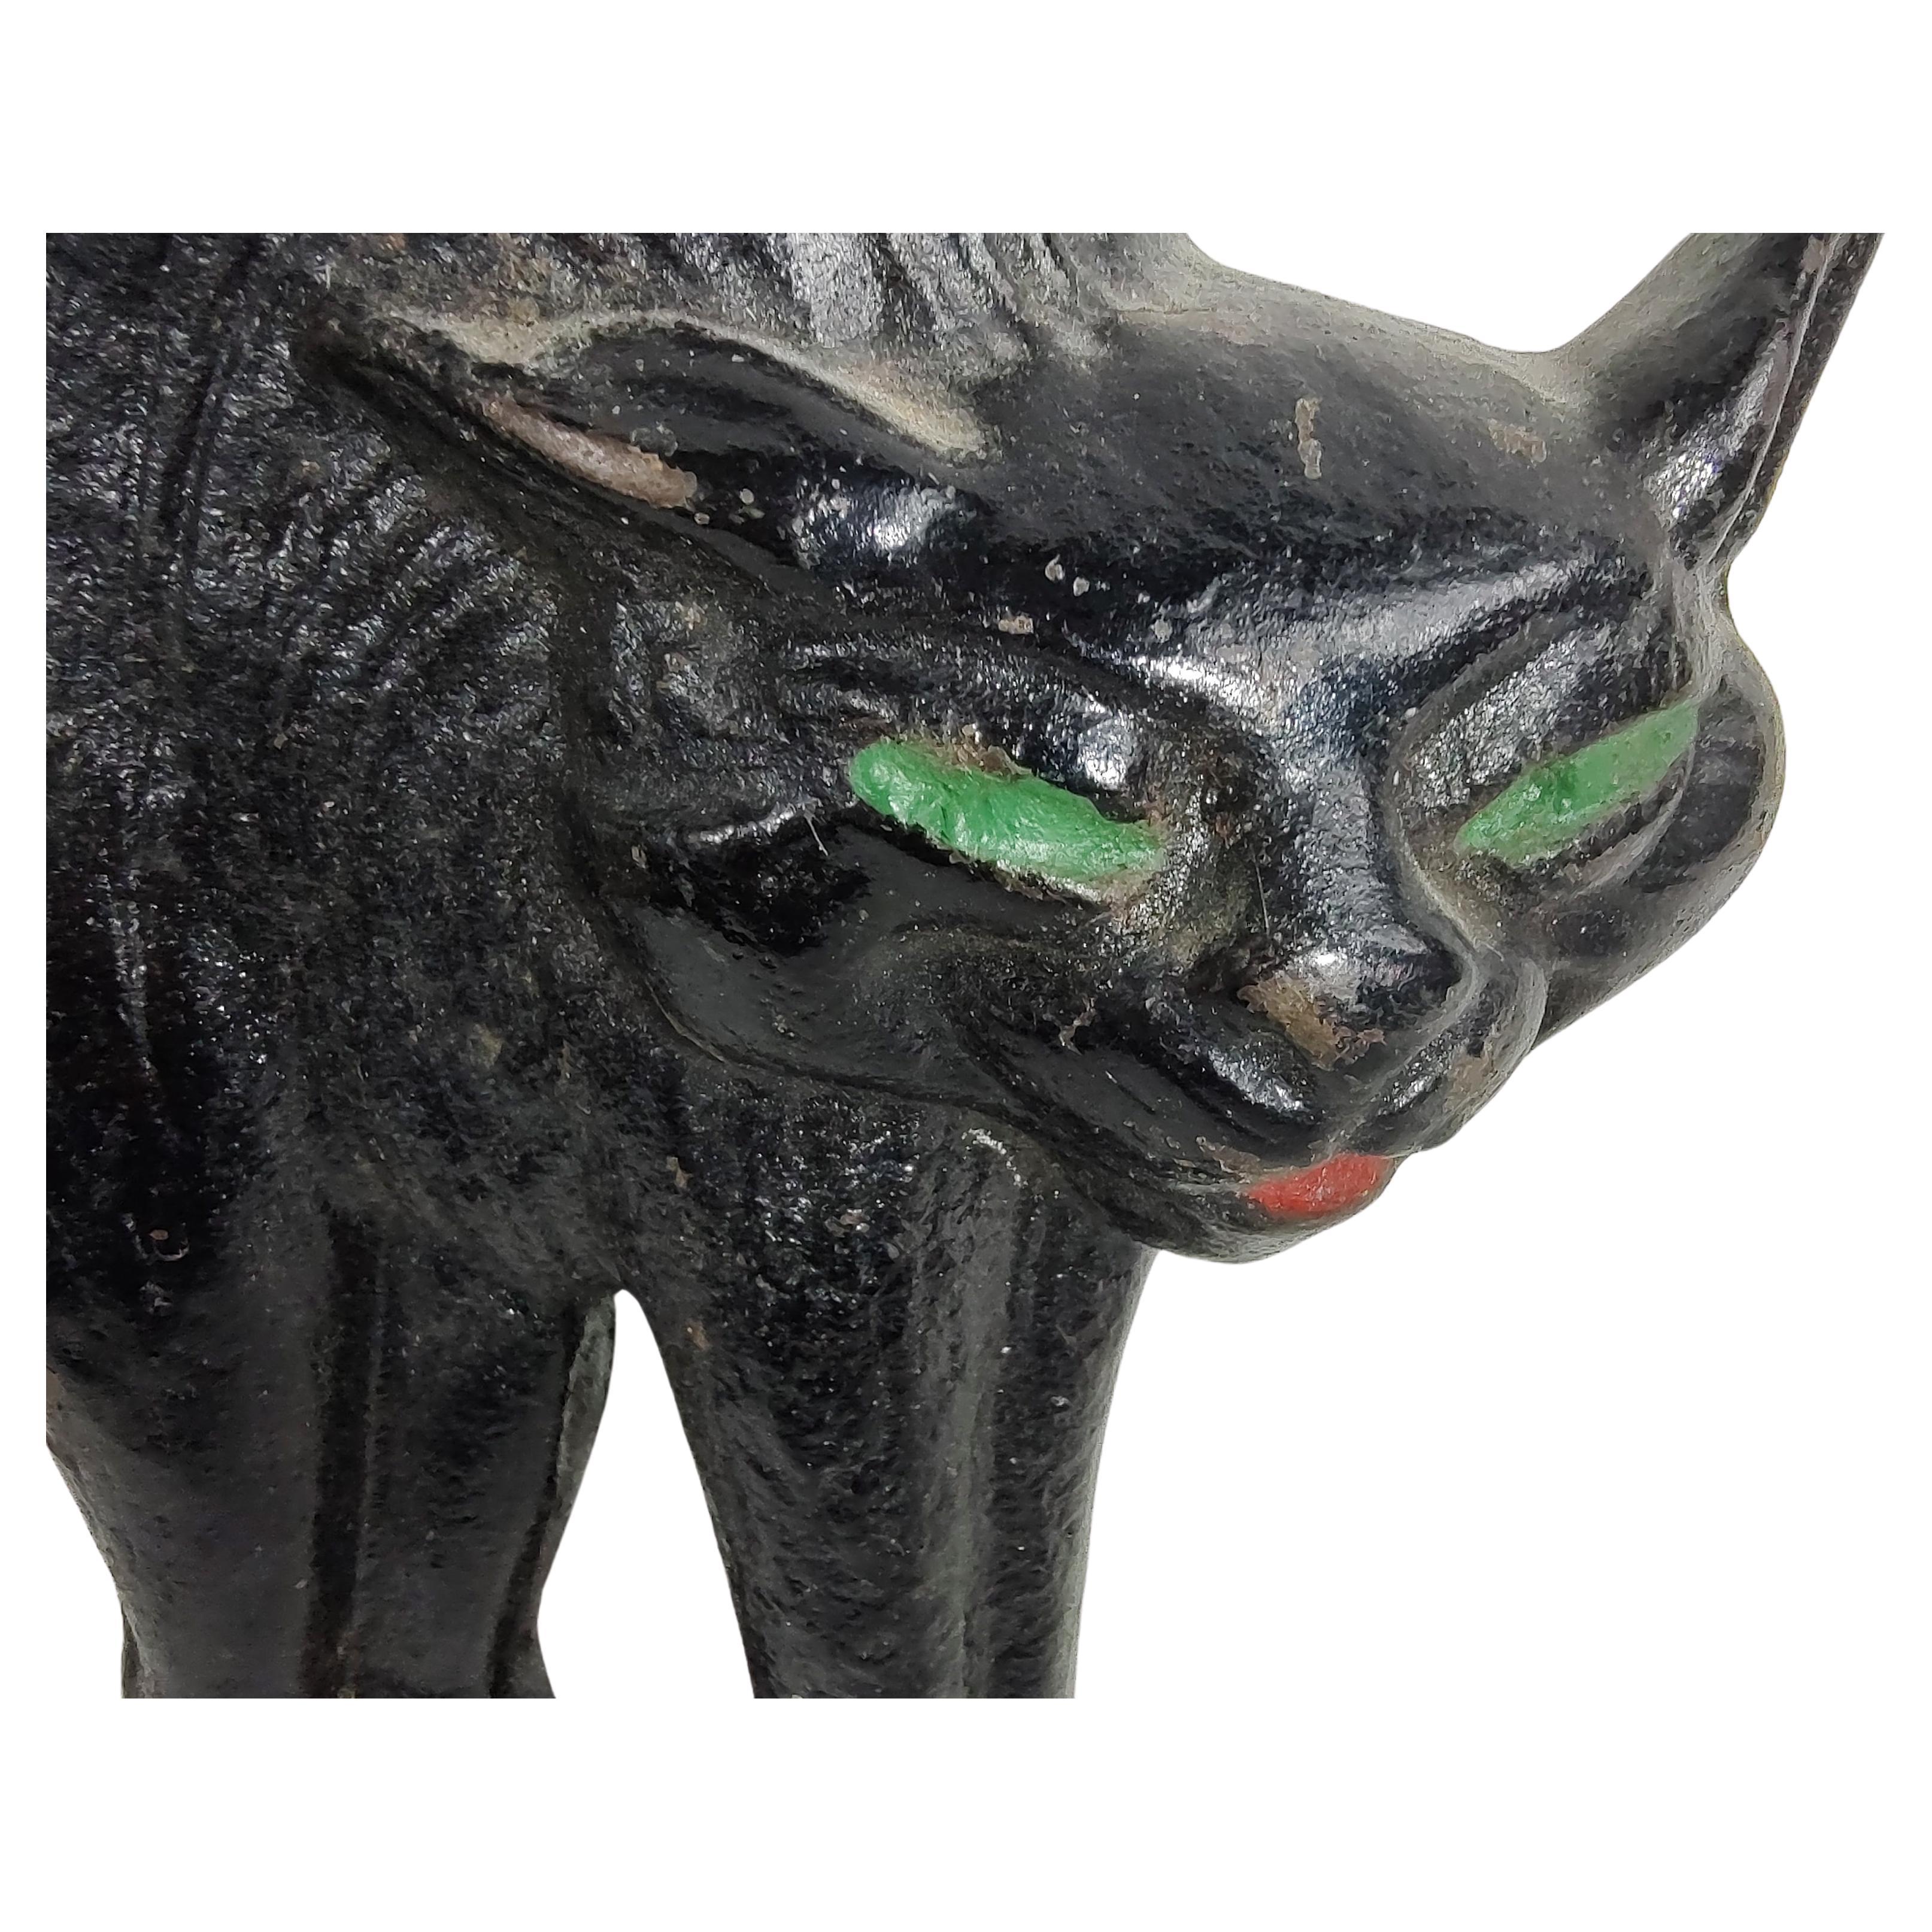 Fabulous stylized cast iron cat with arched back possibly hissing. Hand painted and a rare form from the Art Deco period. In excellent vintage condition with minimal wear.